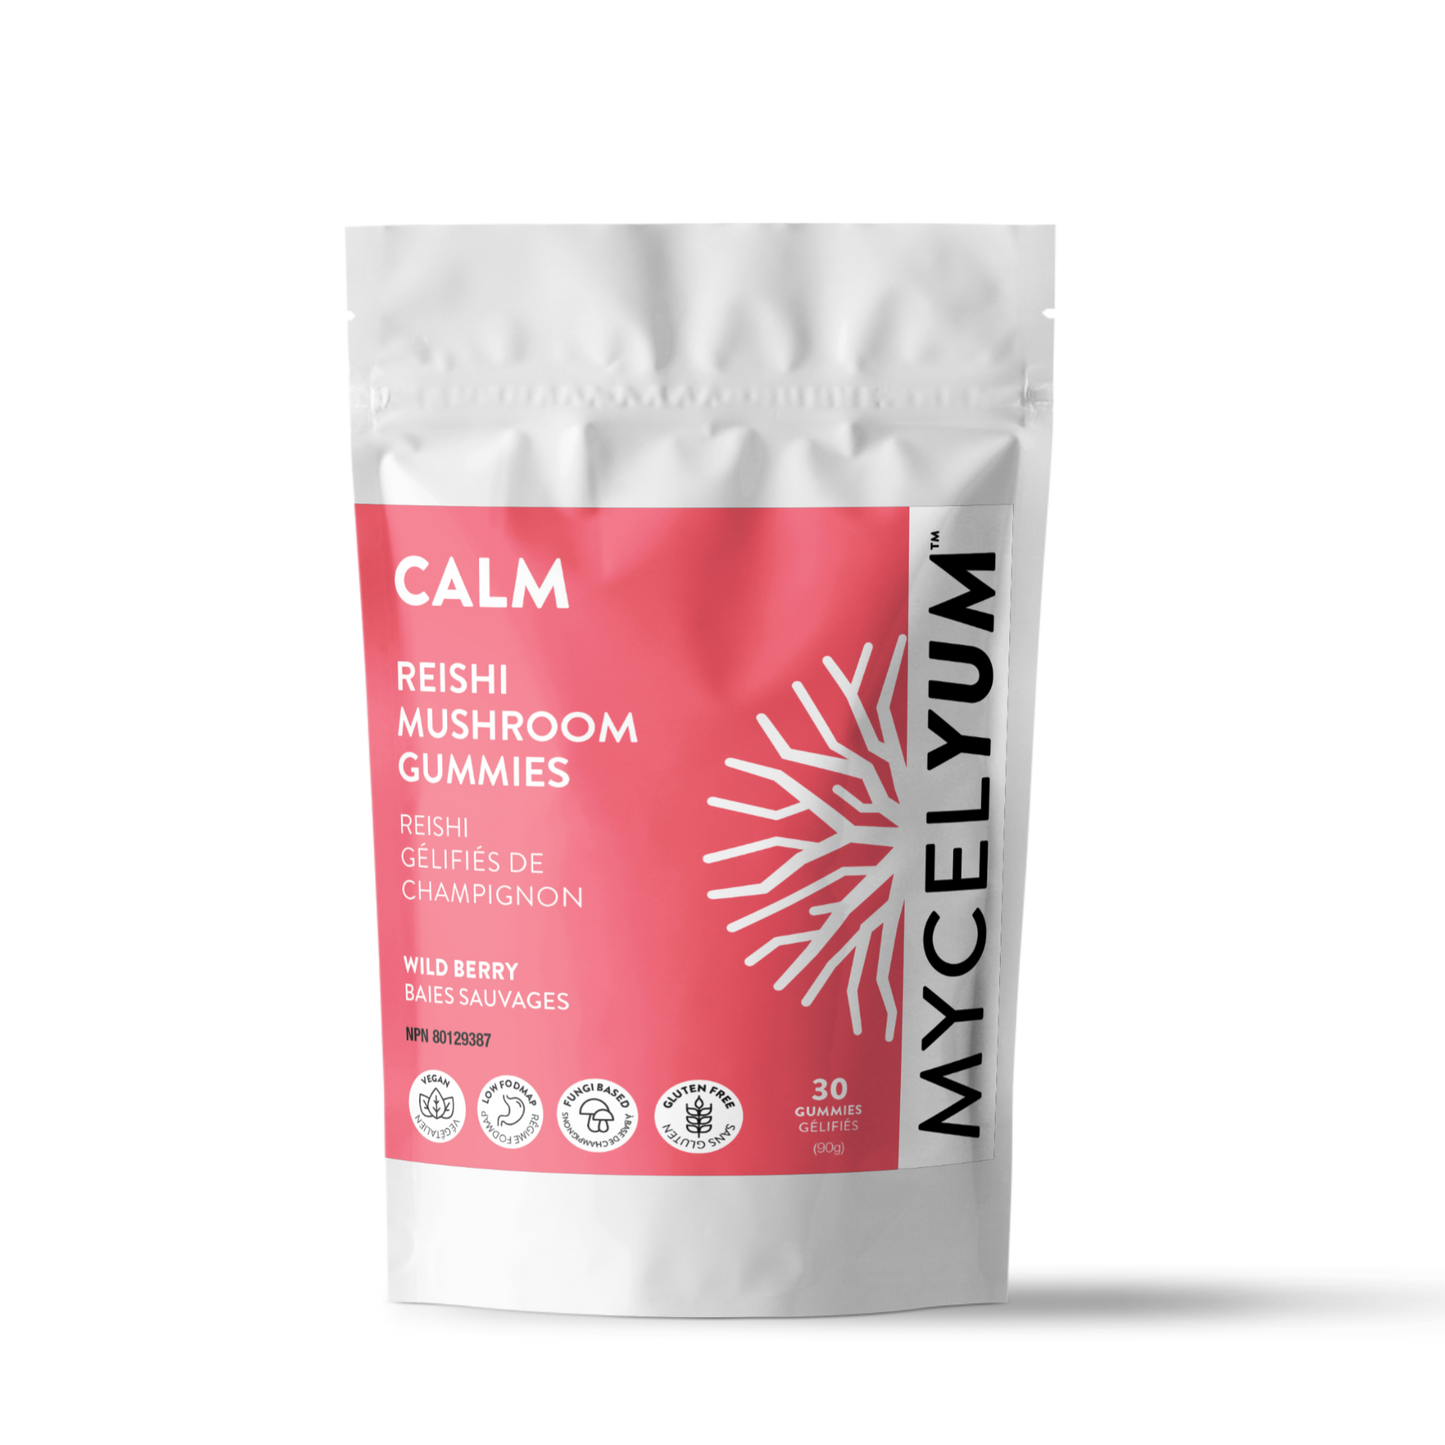 CALM with Reishi